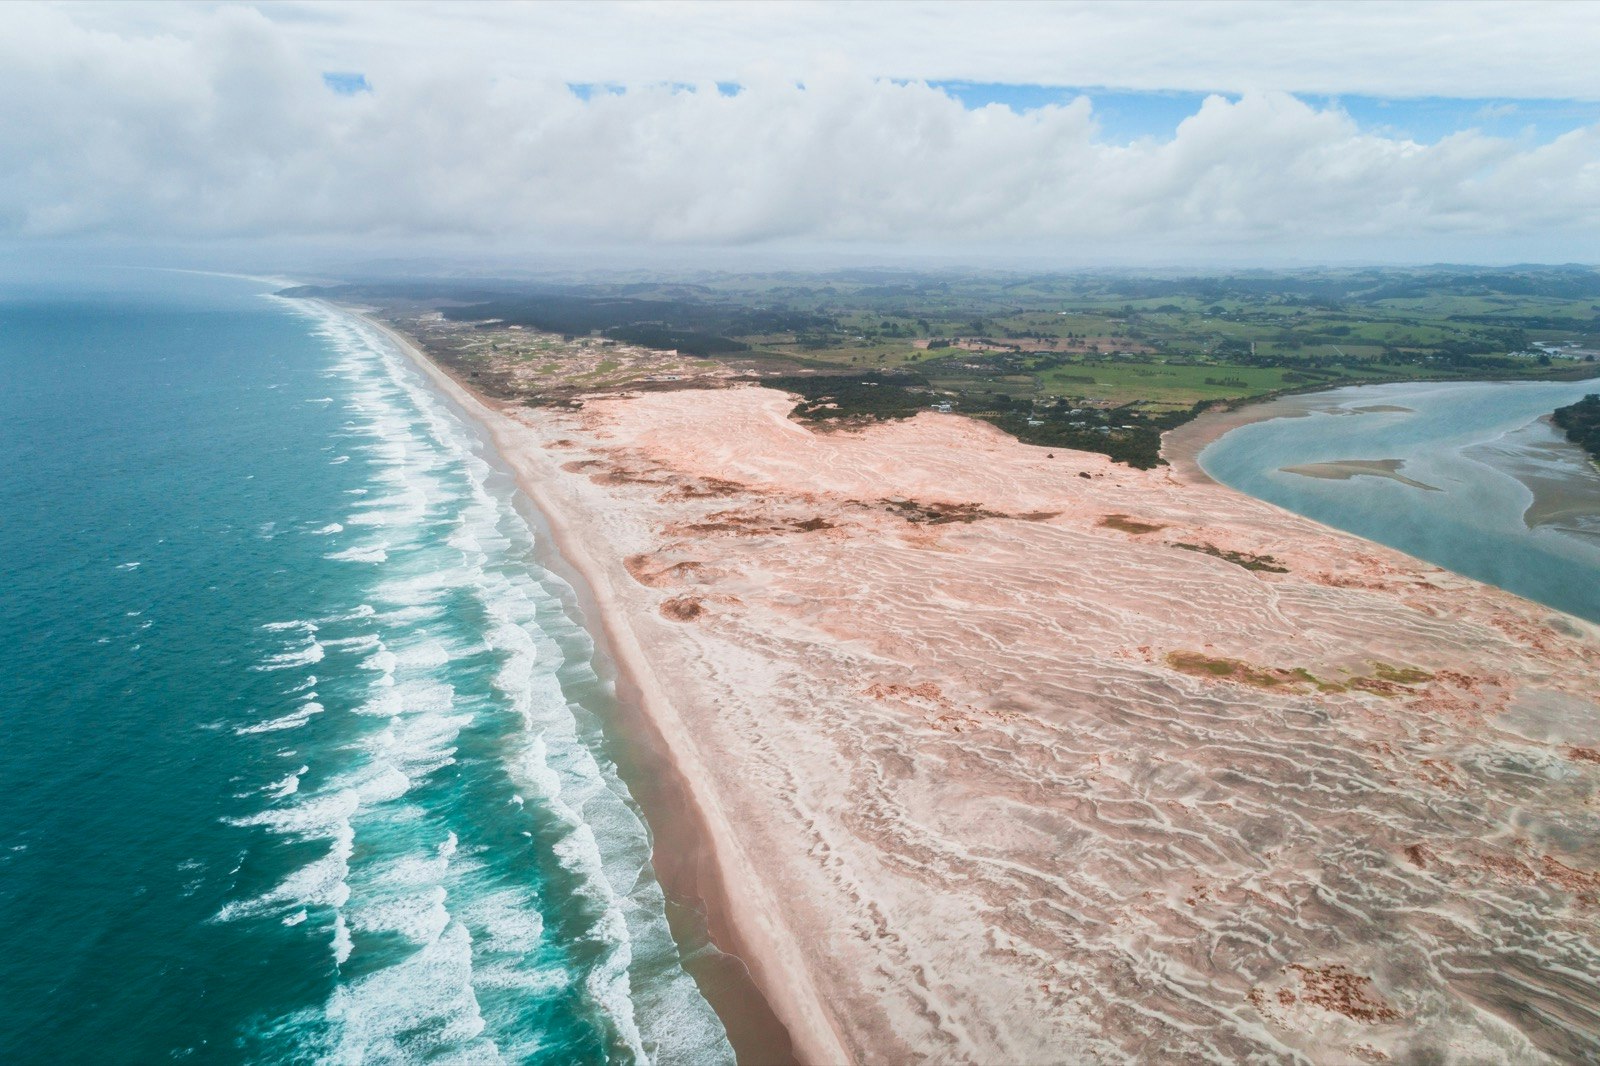 Aerial view of Mangawhai heads, North Island, New Zealand; lines of white waves build as they approach the azure shallows before crashing on the pinkish sands